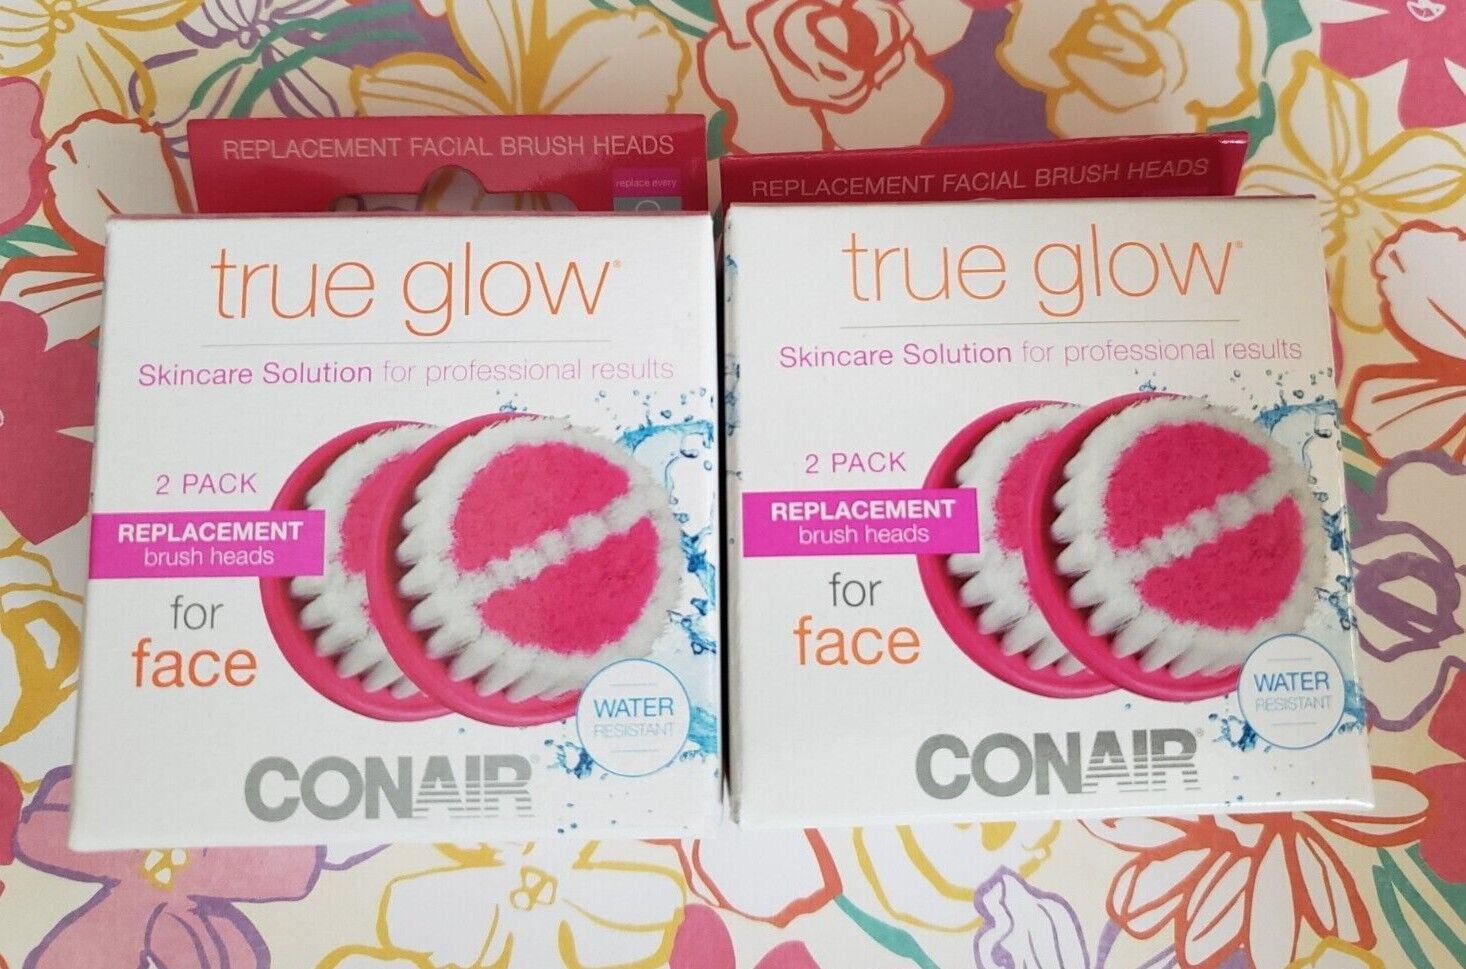 (2) Conair True Glow Facial Replacement Brush Heads For Face 2 Per Pk = 4 Heads